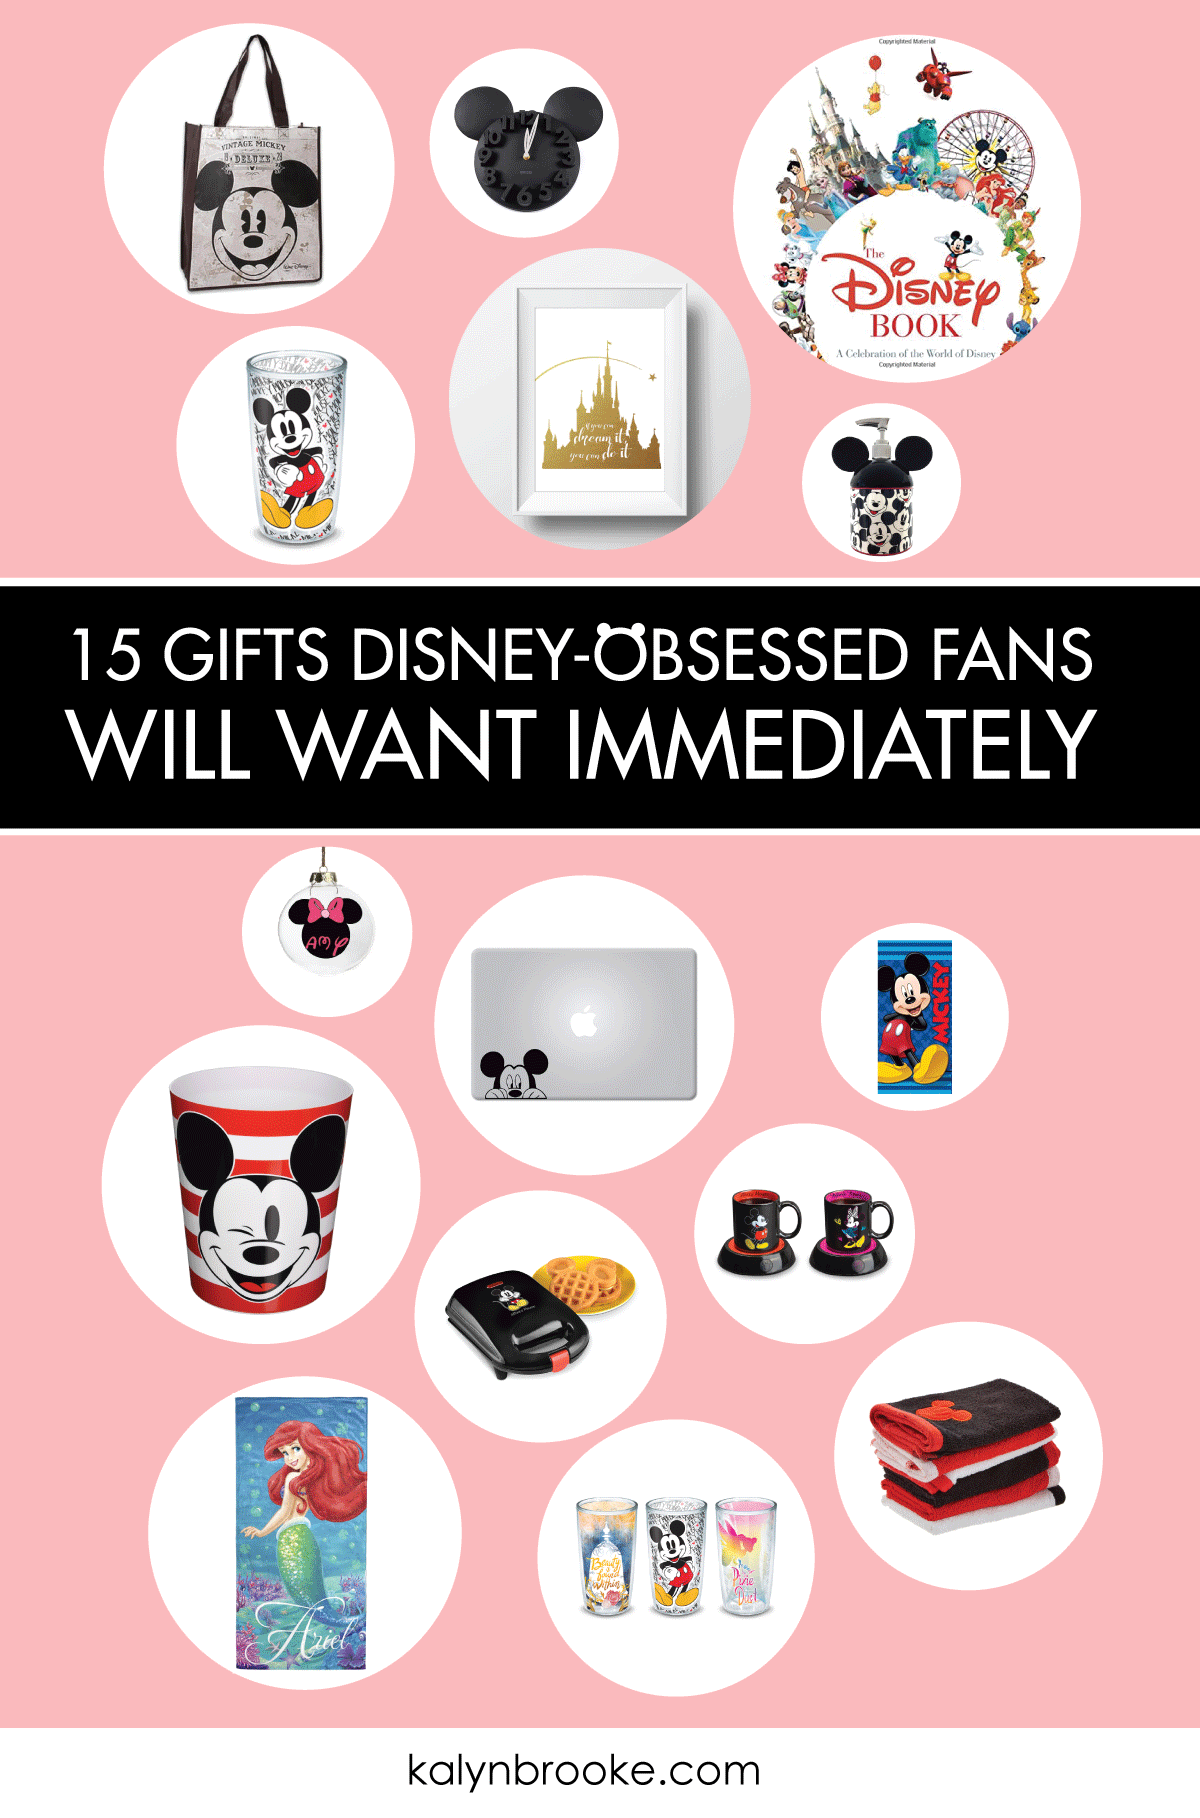 Use this Disney Gift Guide as your one stop shop for the Disney-obsessed fan in your life. With 15 awesome and affordable options to reignite that one-of-a-kind Disney magic, you're sure to make everyone feel like a kid again! #disneygiftideas #disneyobsessed #disney #giftideas